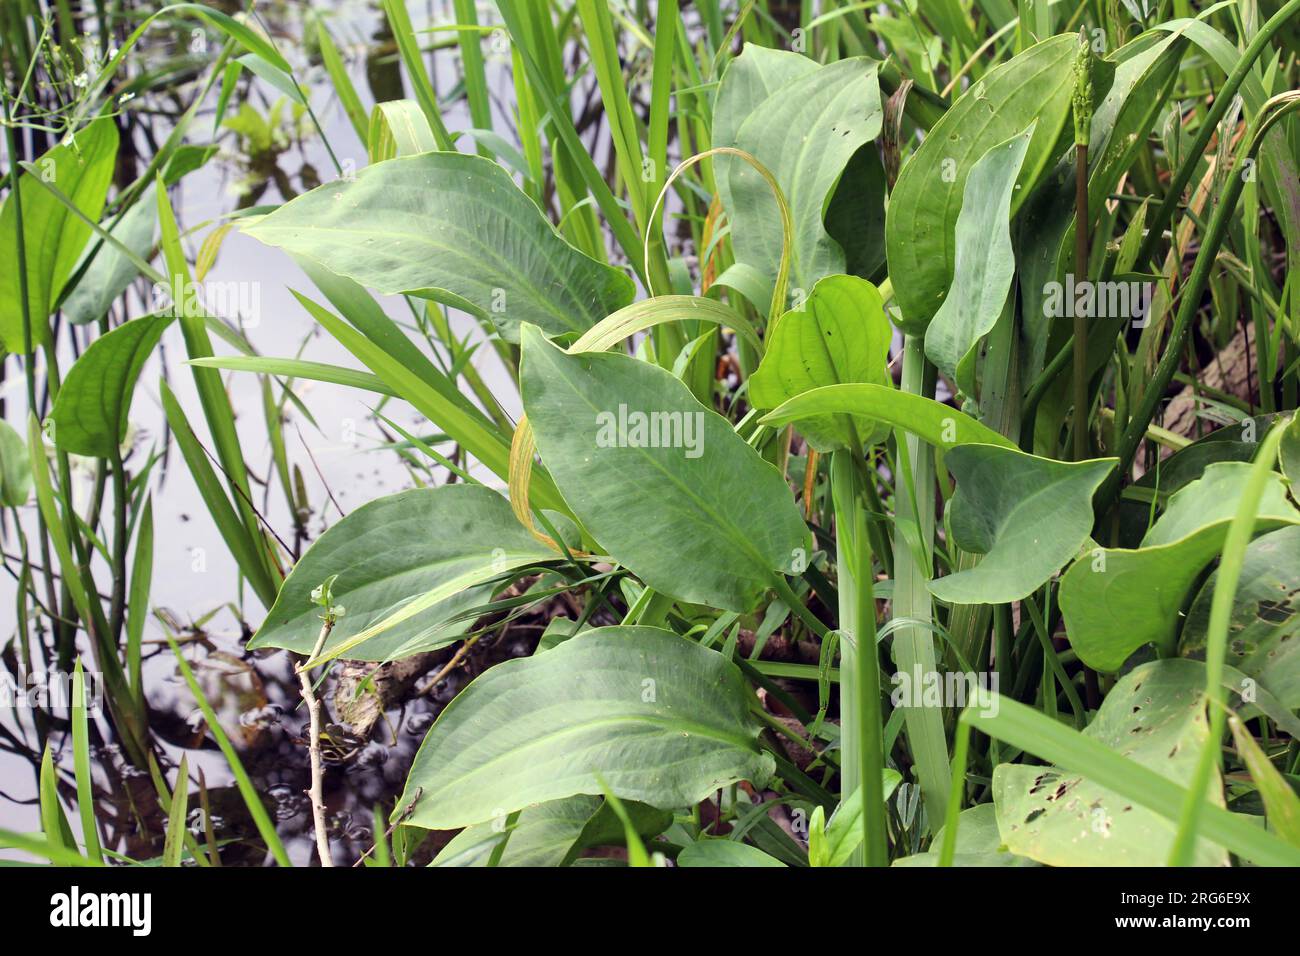 Alisma plantago-aquatica grows in the shallow water of the river bank Stock Photo